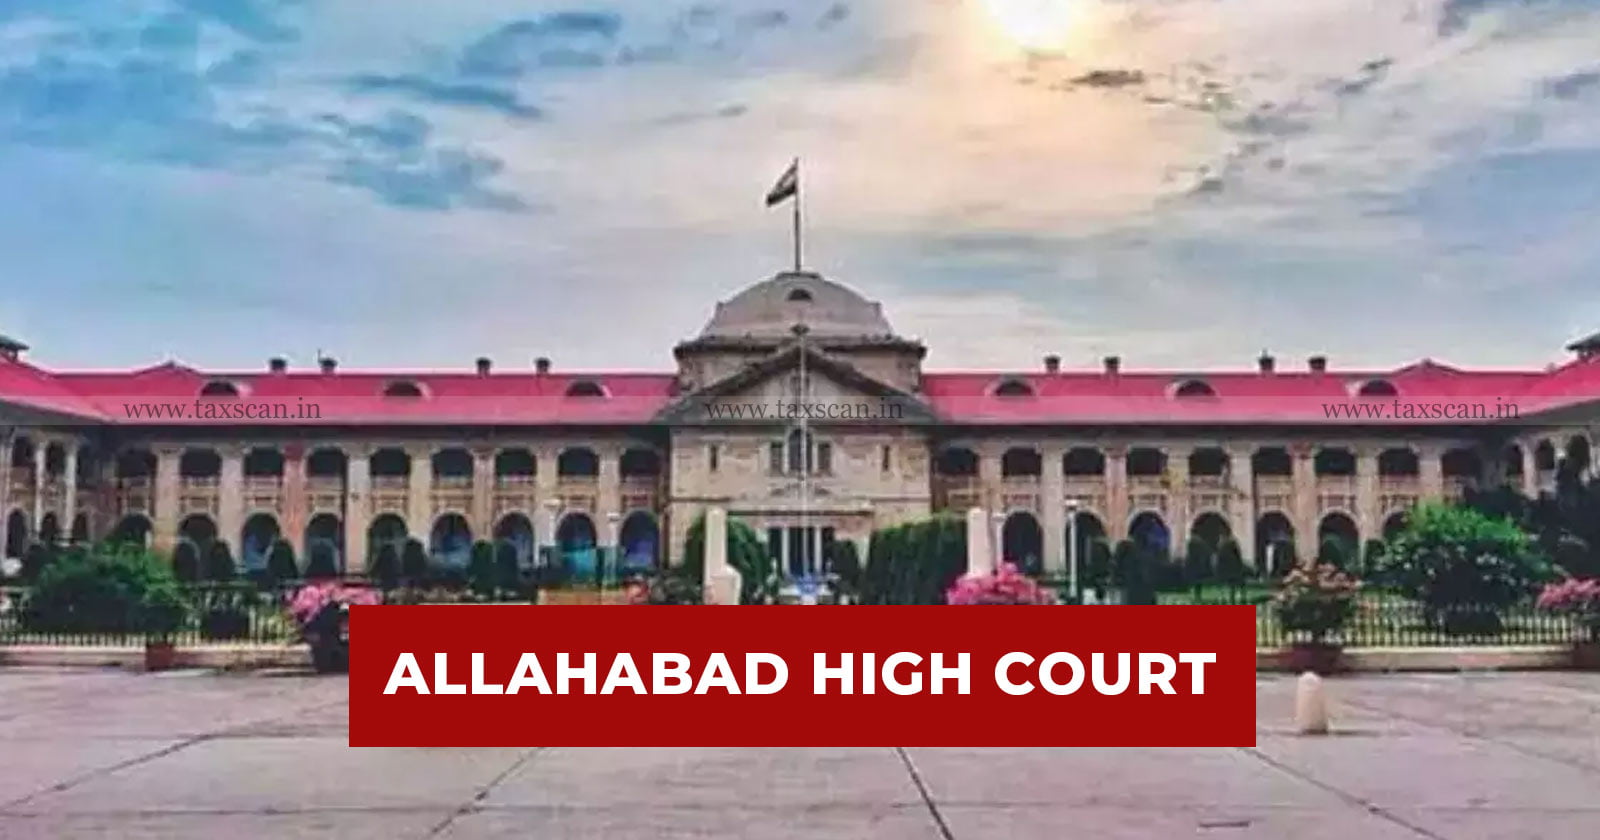 Allahabad high court - excise - cancellation of licences - Section 34(2) - excise acts - TAXSCAN